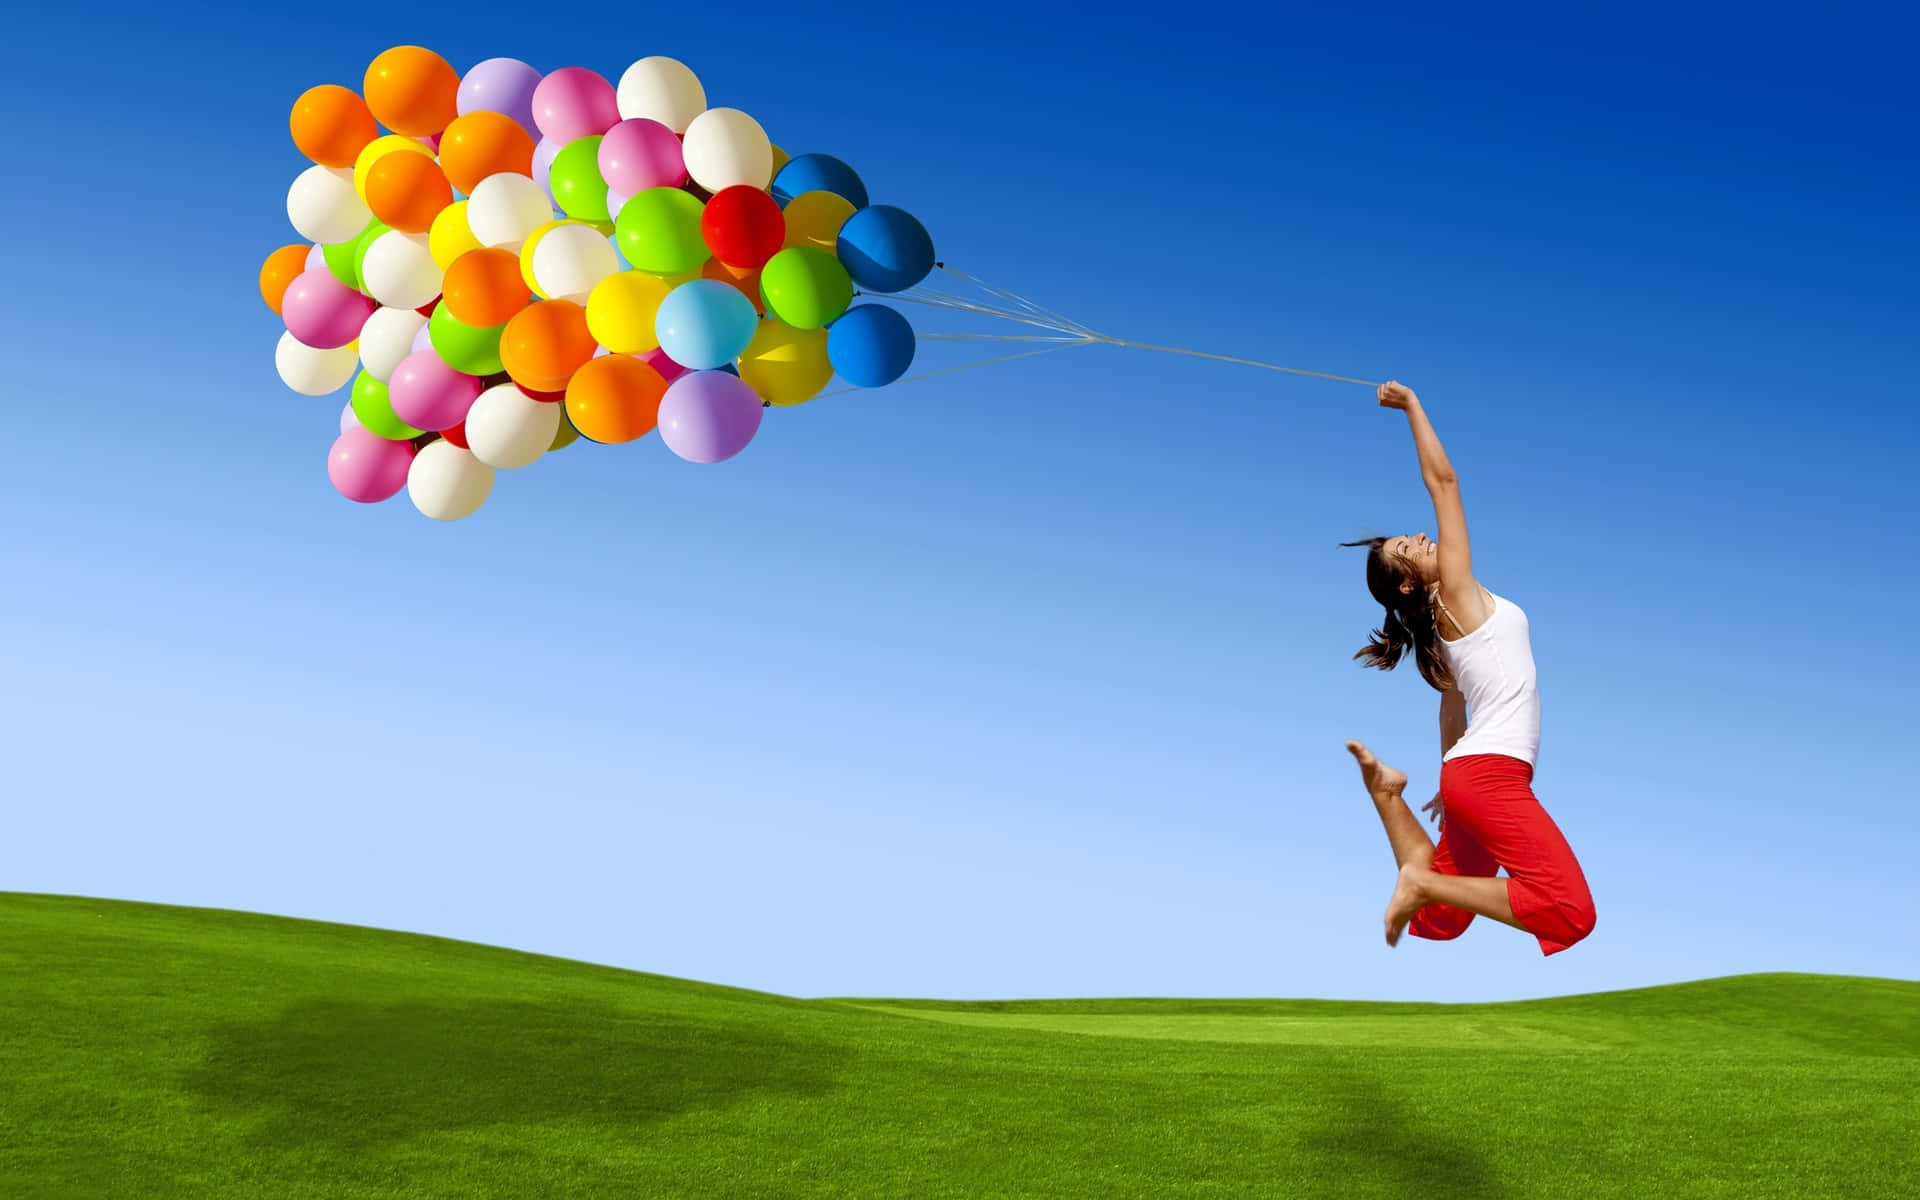 Balloons Background Woman Jumping With Balloons